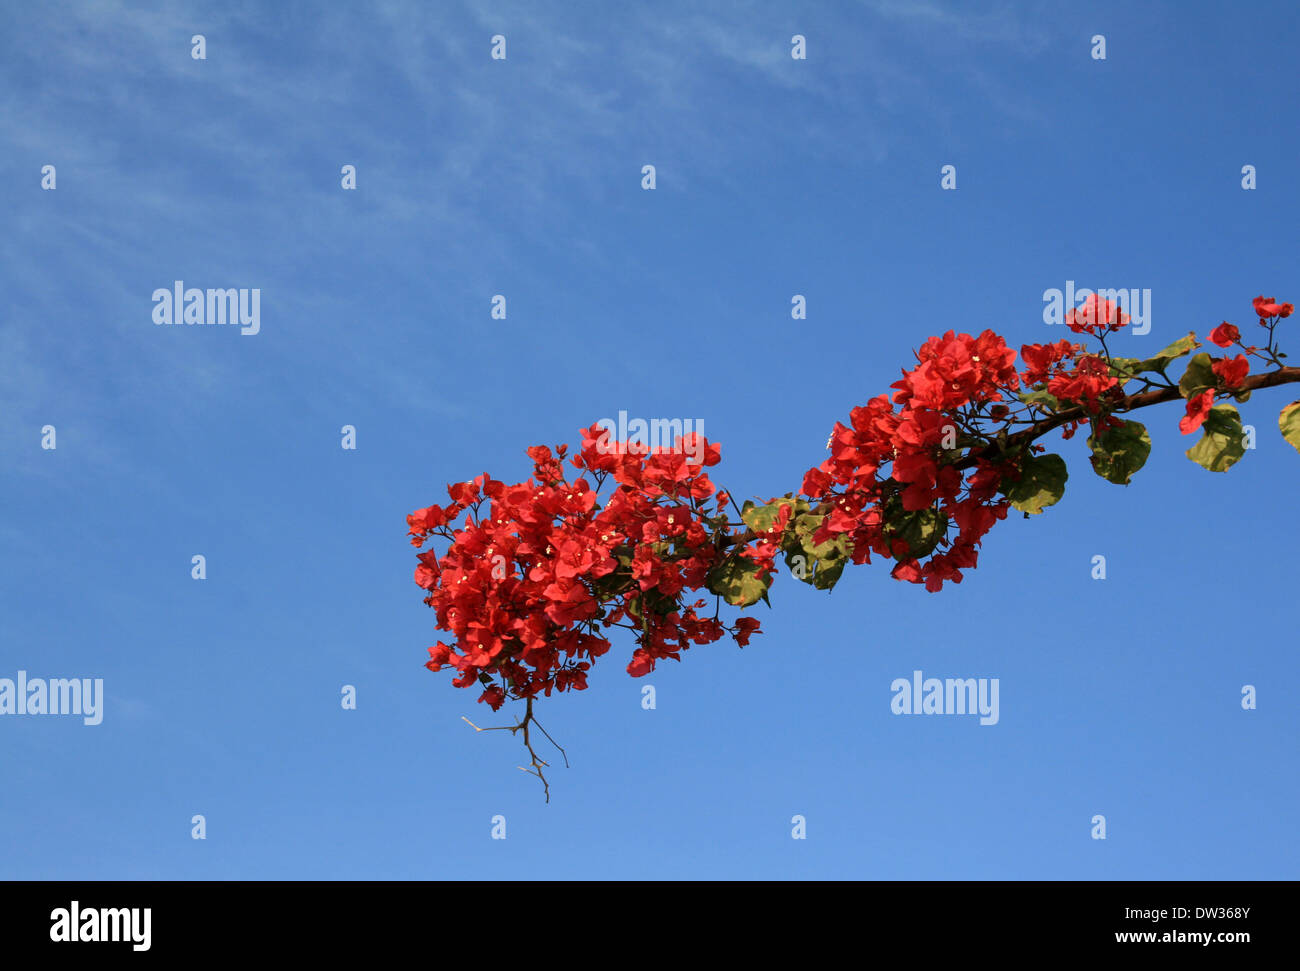 Beautiful Rosette at Blue Sky at Qeshm Island.Spring Coming Soon. Stock Photo